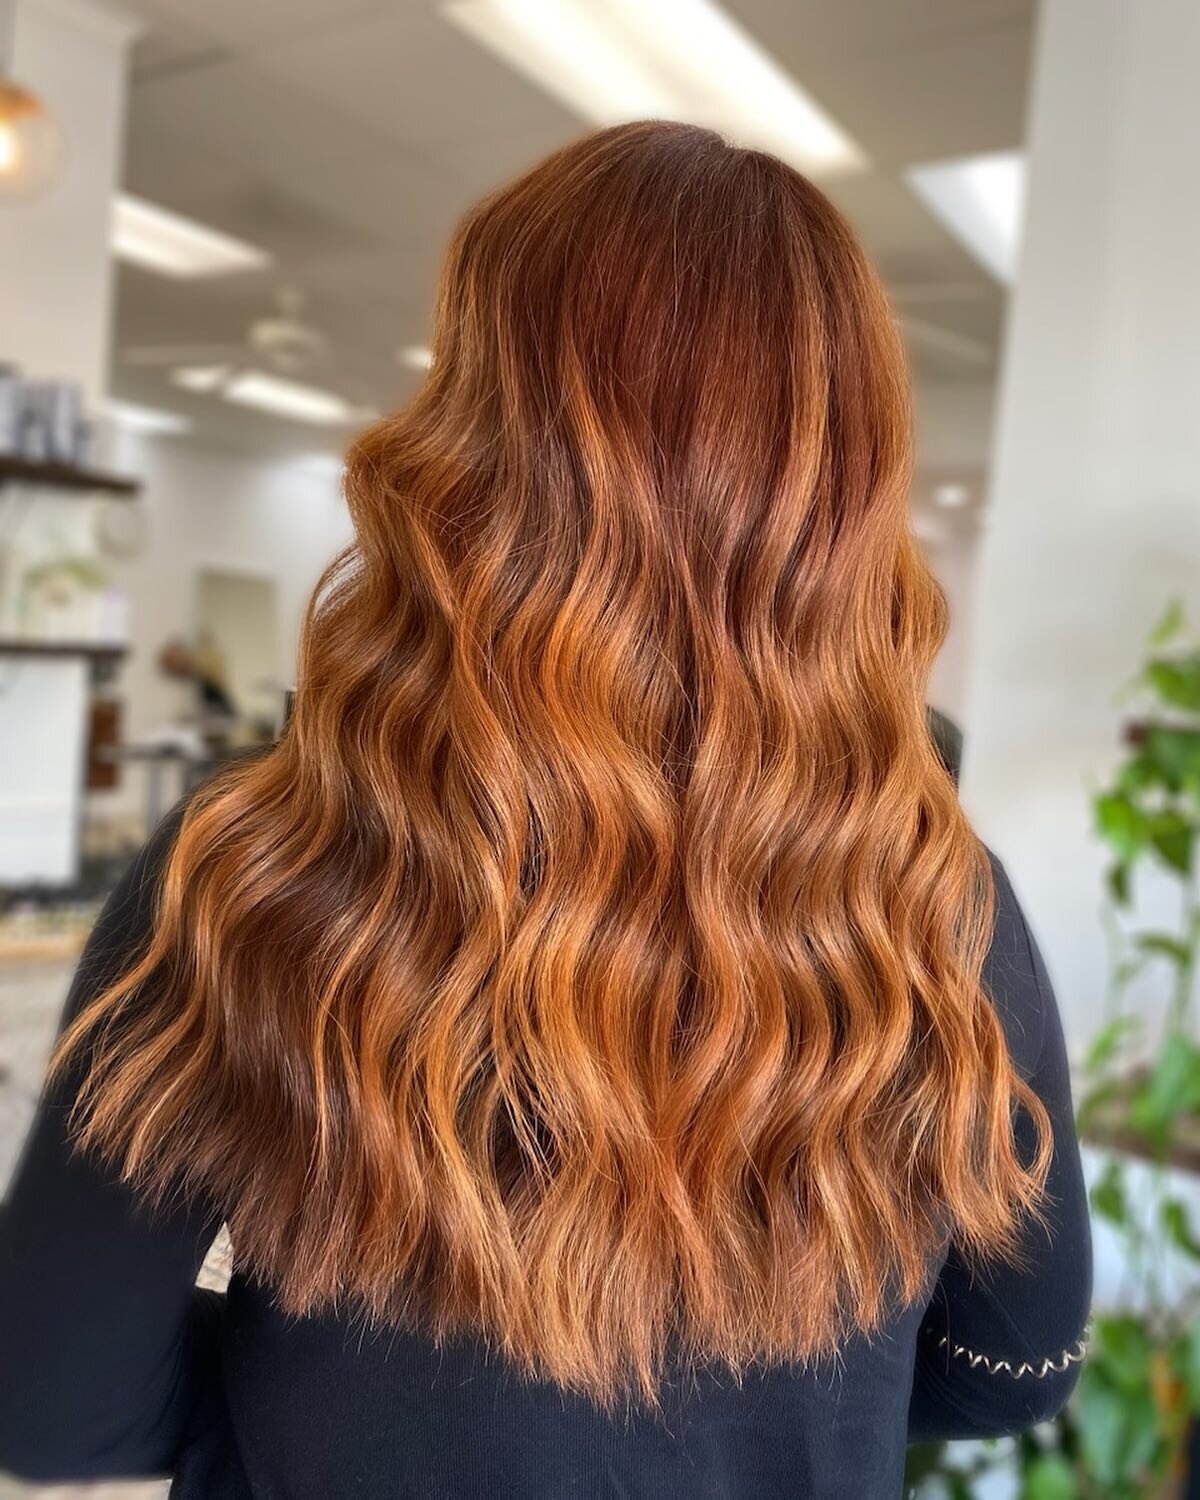 @allnutrient red copper series coming in H O T🔥
Hair by: @a_and_co._beauty 

Formula -
Root: 30g 7RC 30g 8RC 5g 7G 35g 7N 20vol
Toner on pre lifted ends: 6IC 8IC demi